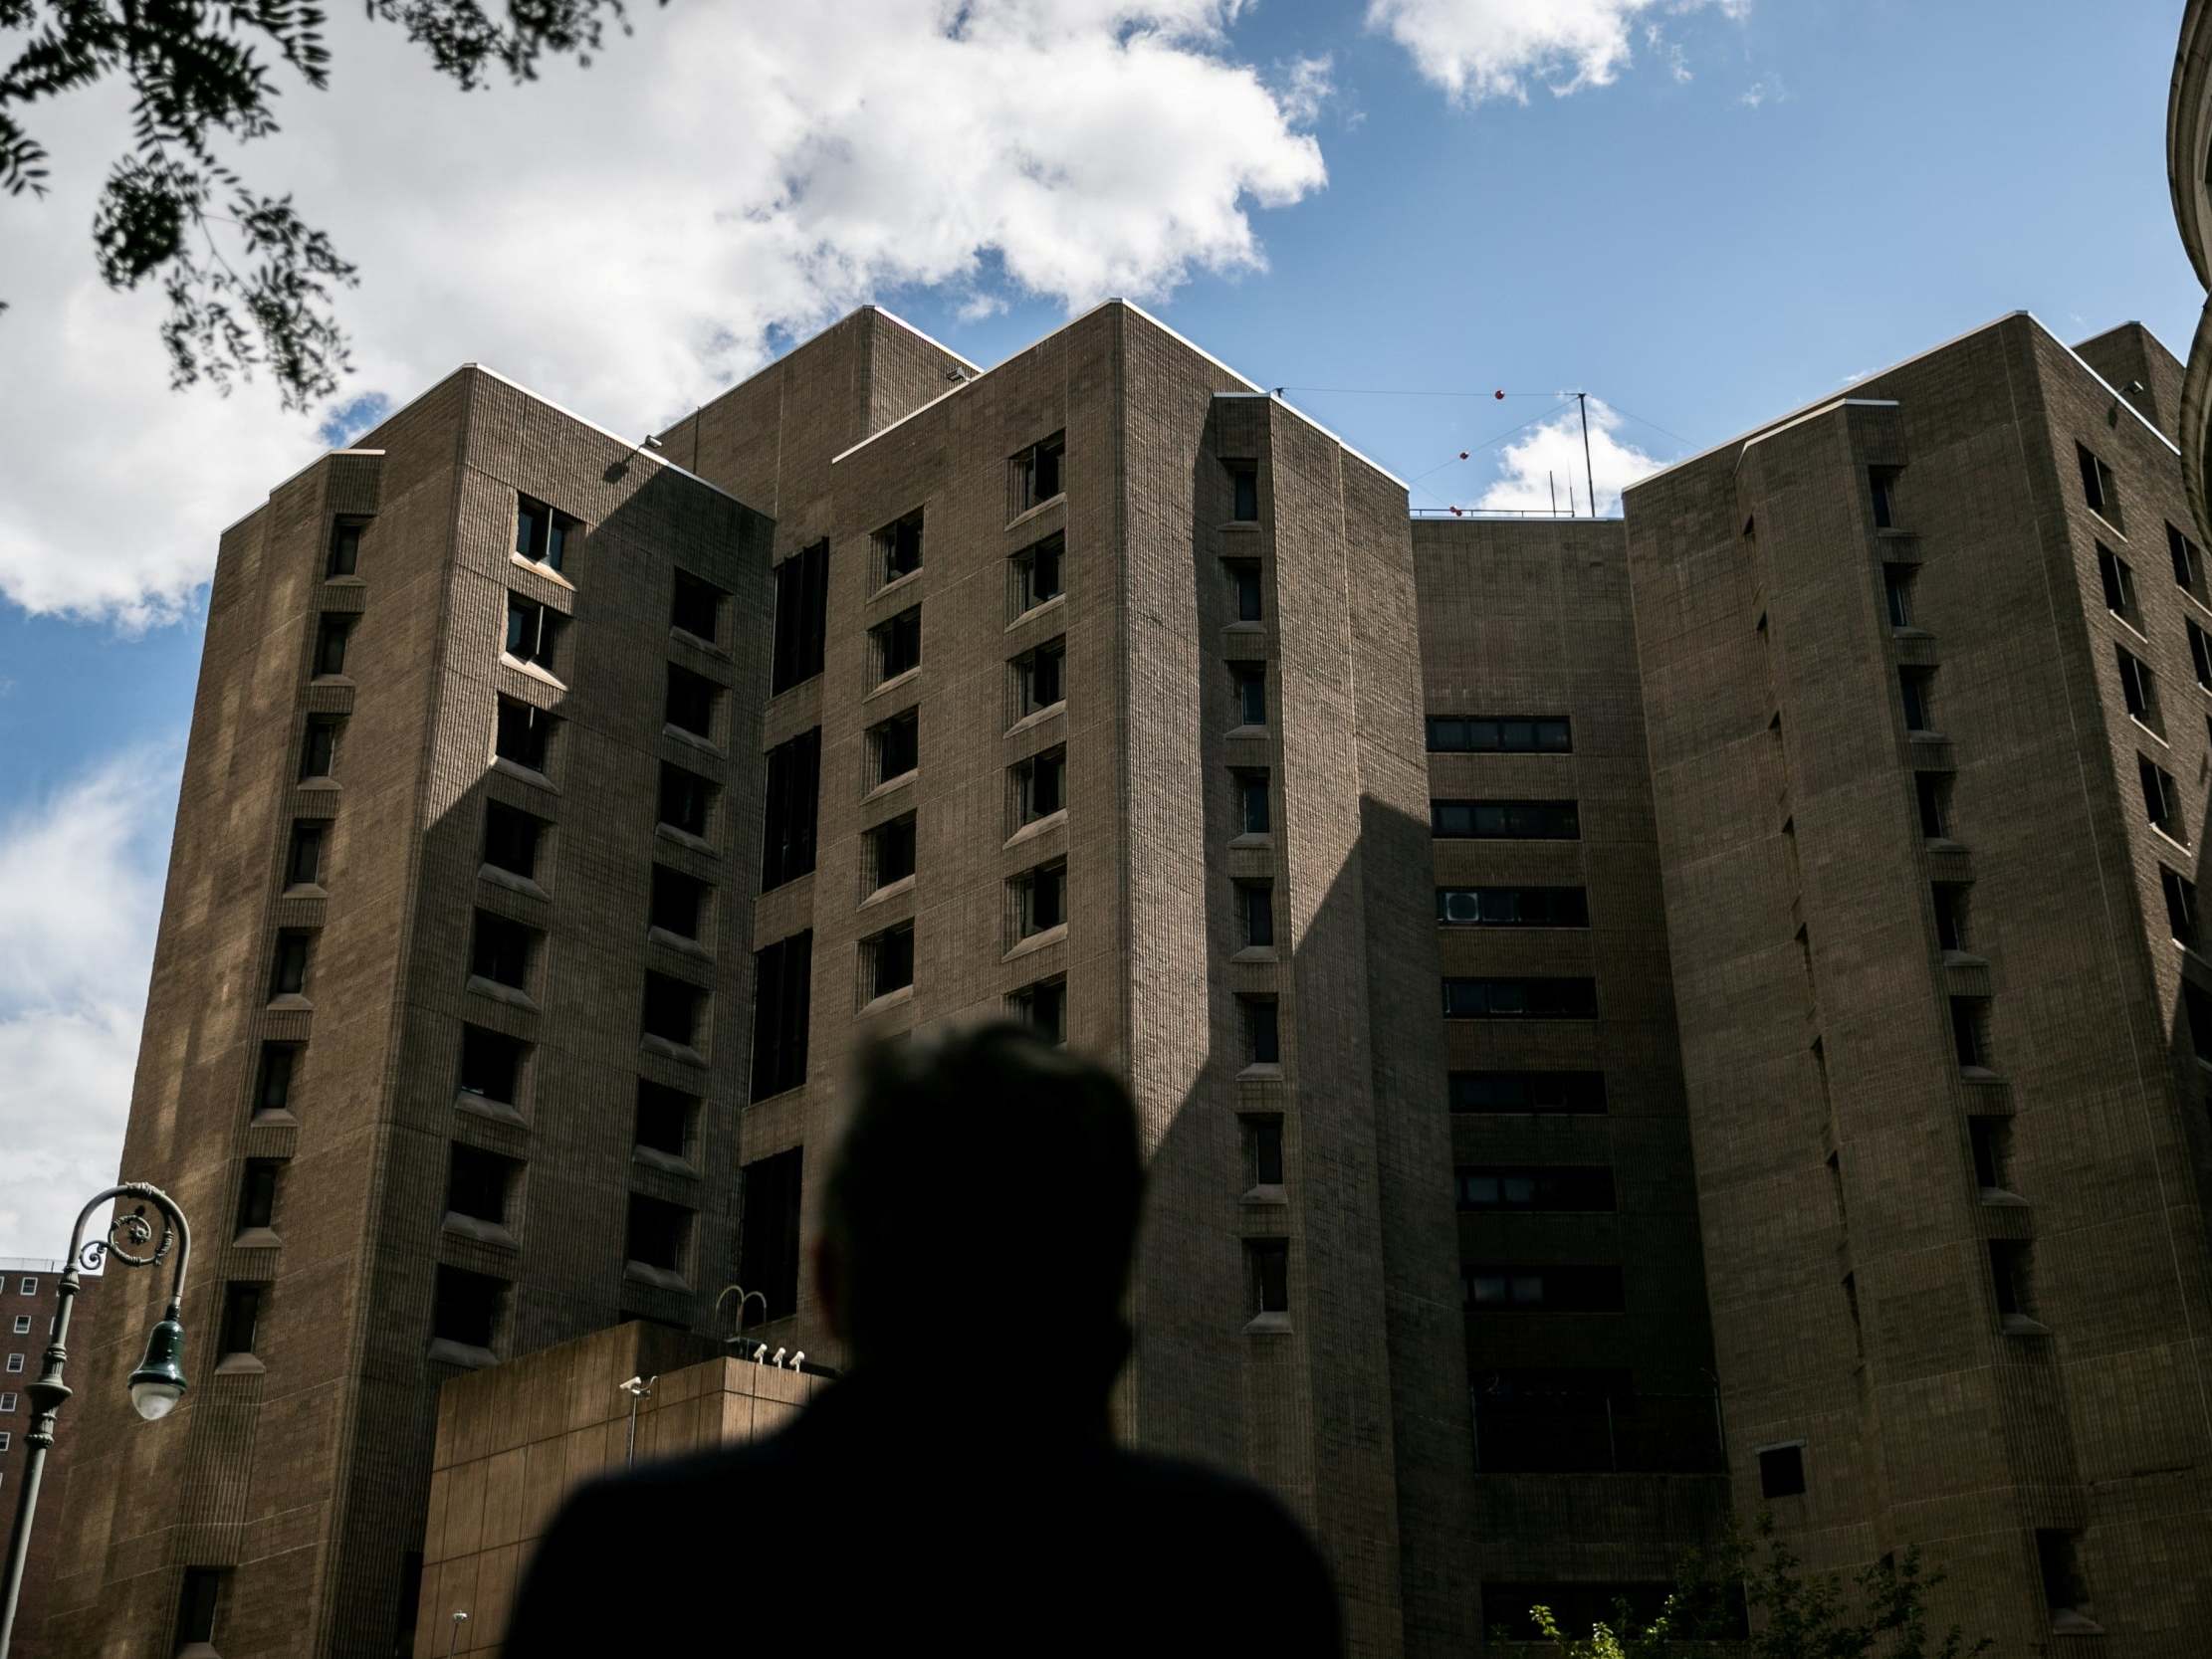 Questions are aplenty around why Epstein was taken off suicide watch at the Metropolitan Correctional Center